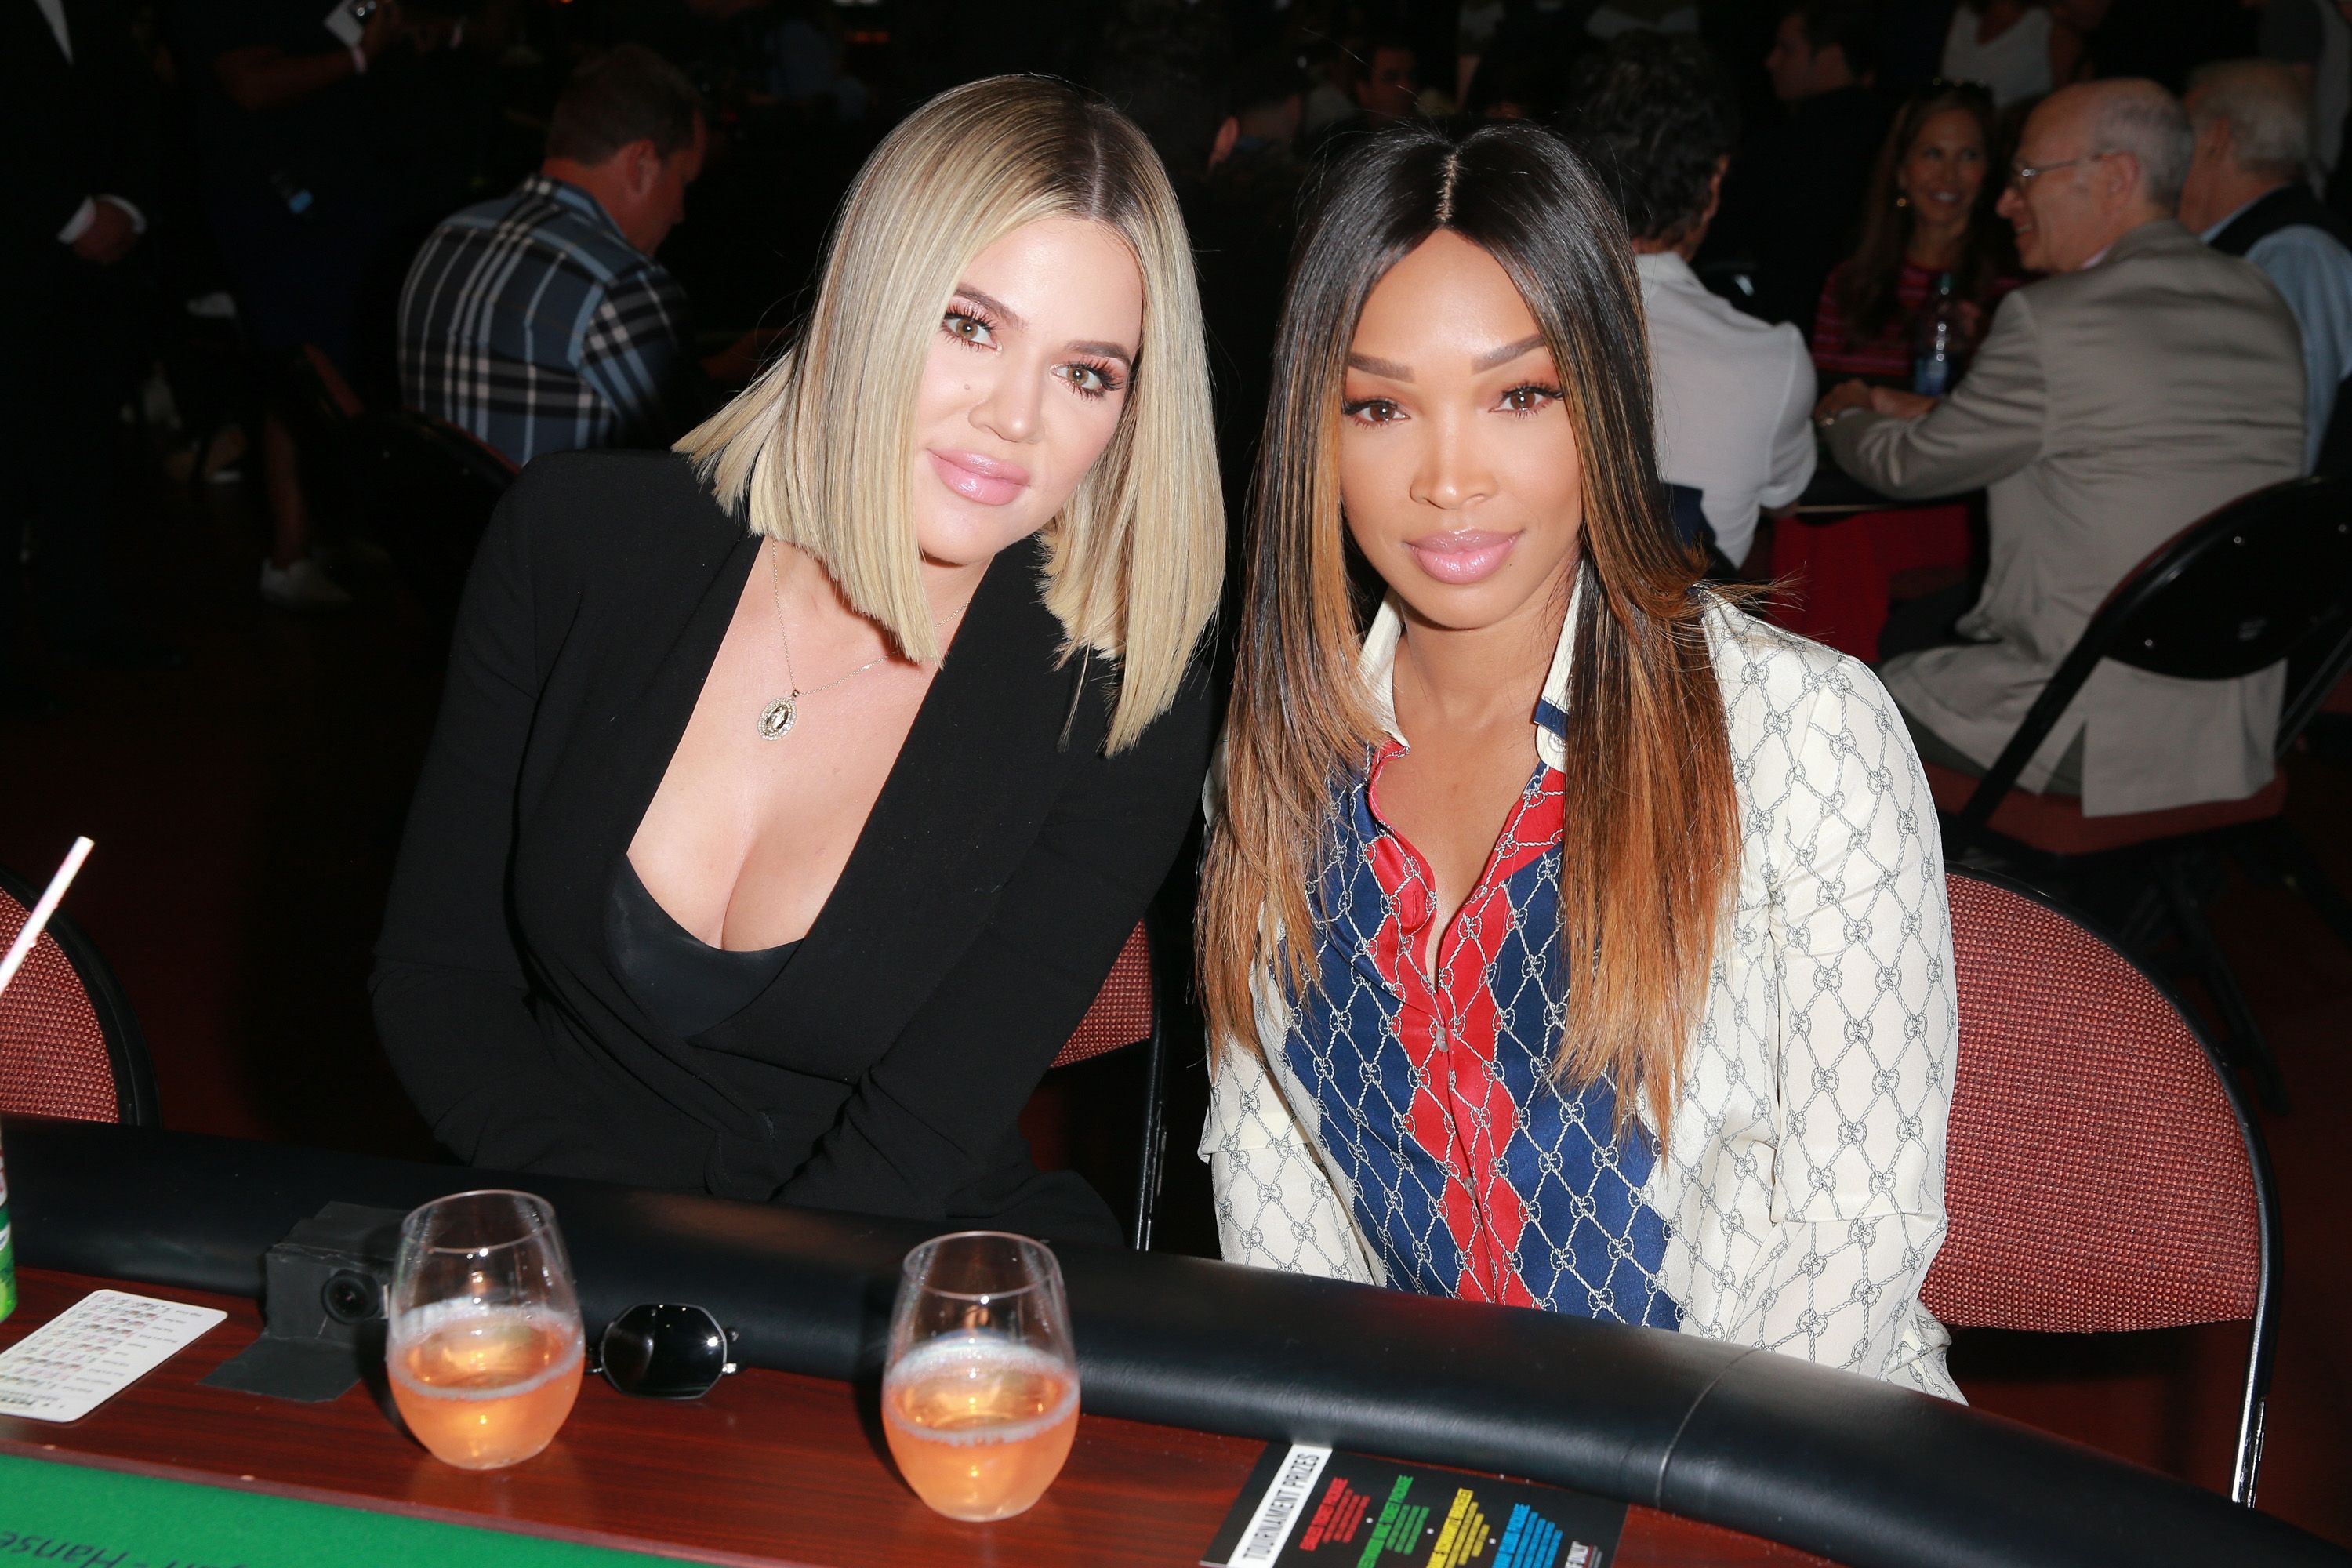 Khloe Kardashian and Malika Haqq during the first annual "If Only" Texas Hold'em charity poker tournament benefiting City of Hope at The Forum on July 29, 2018 in Inglewood, California. | Source: Getty Images